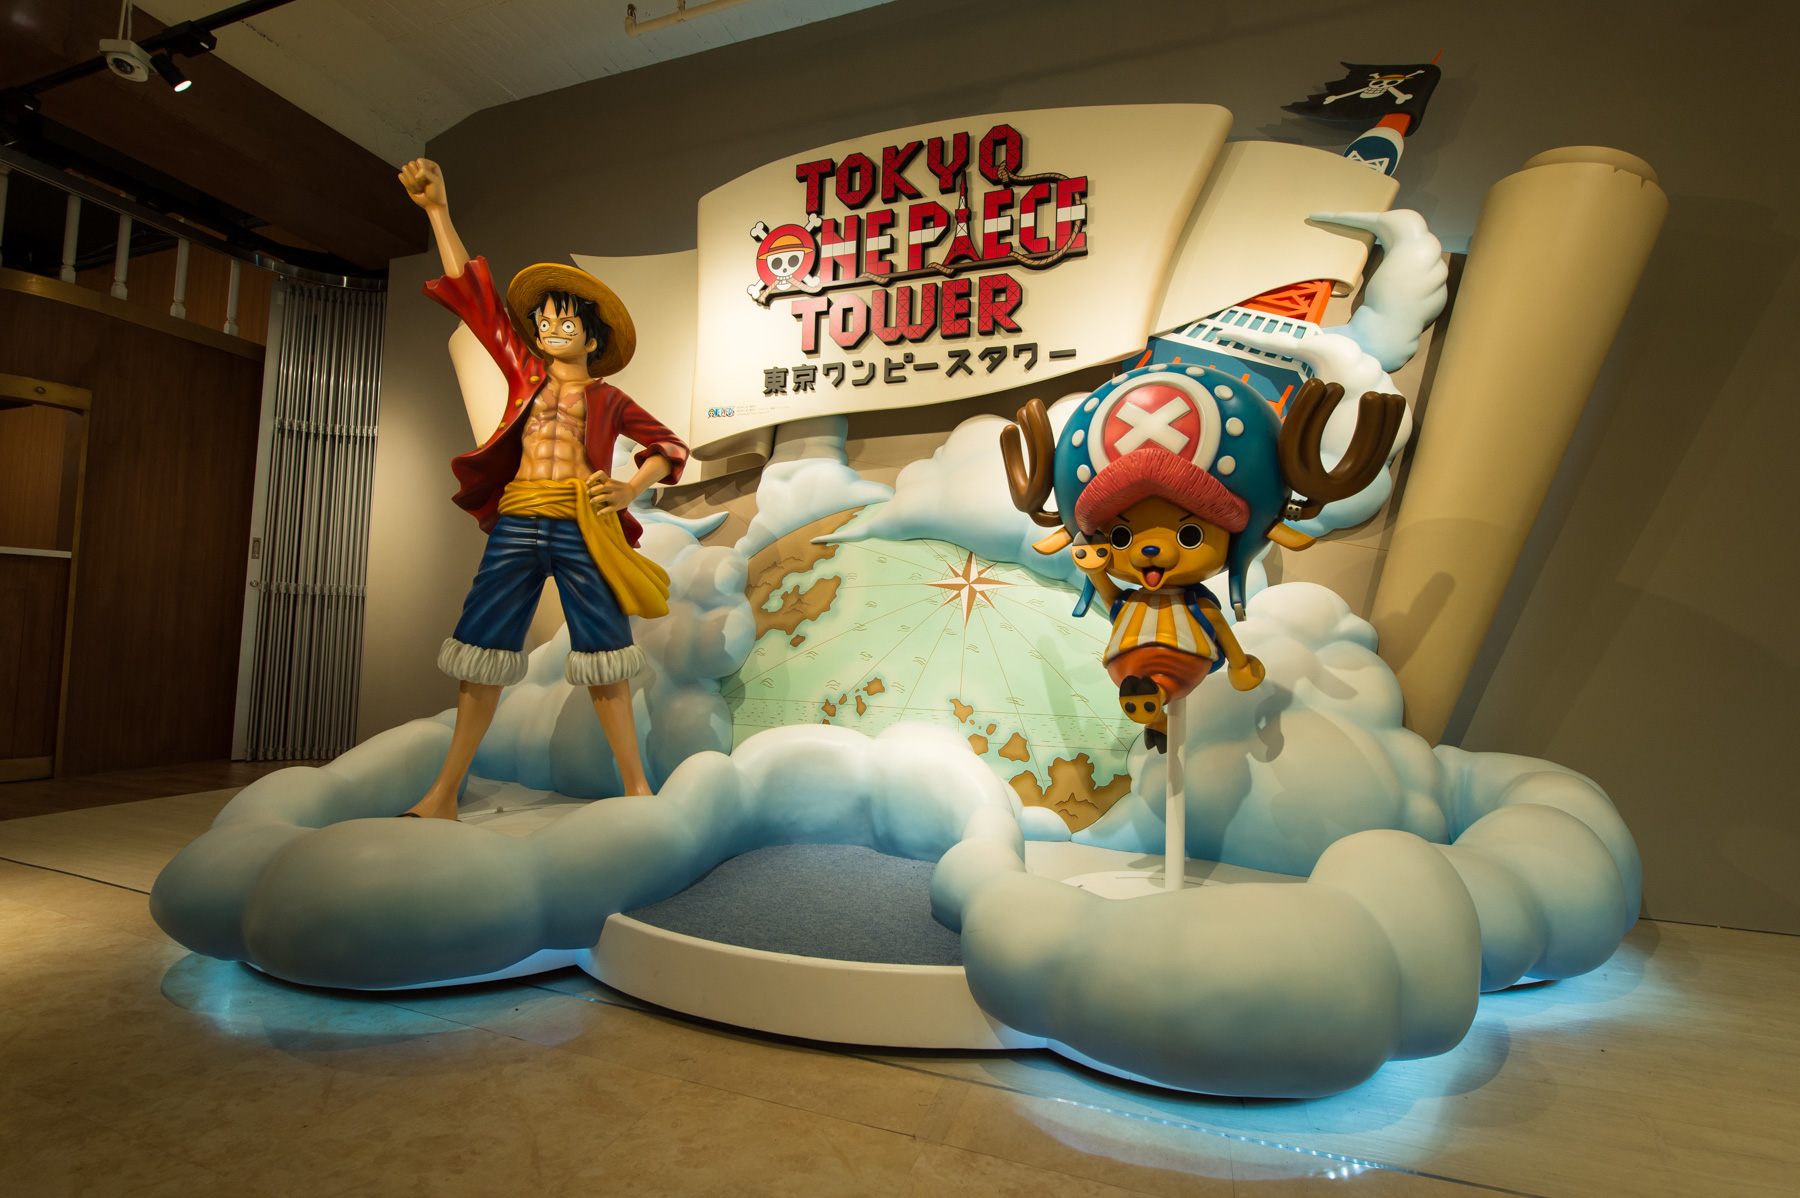 [Close Down] TOKYO ONE PIECE TOWER MustSee, Access, Hours & Price